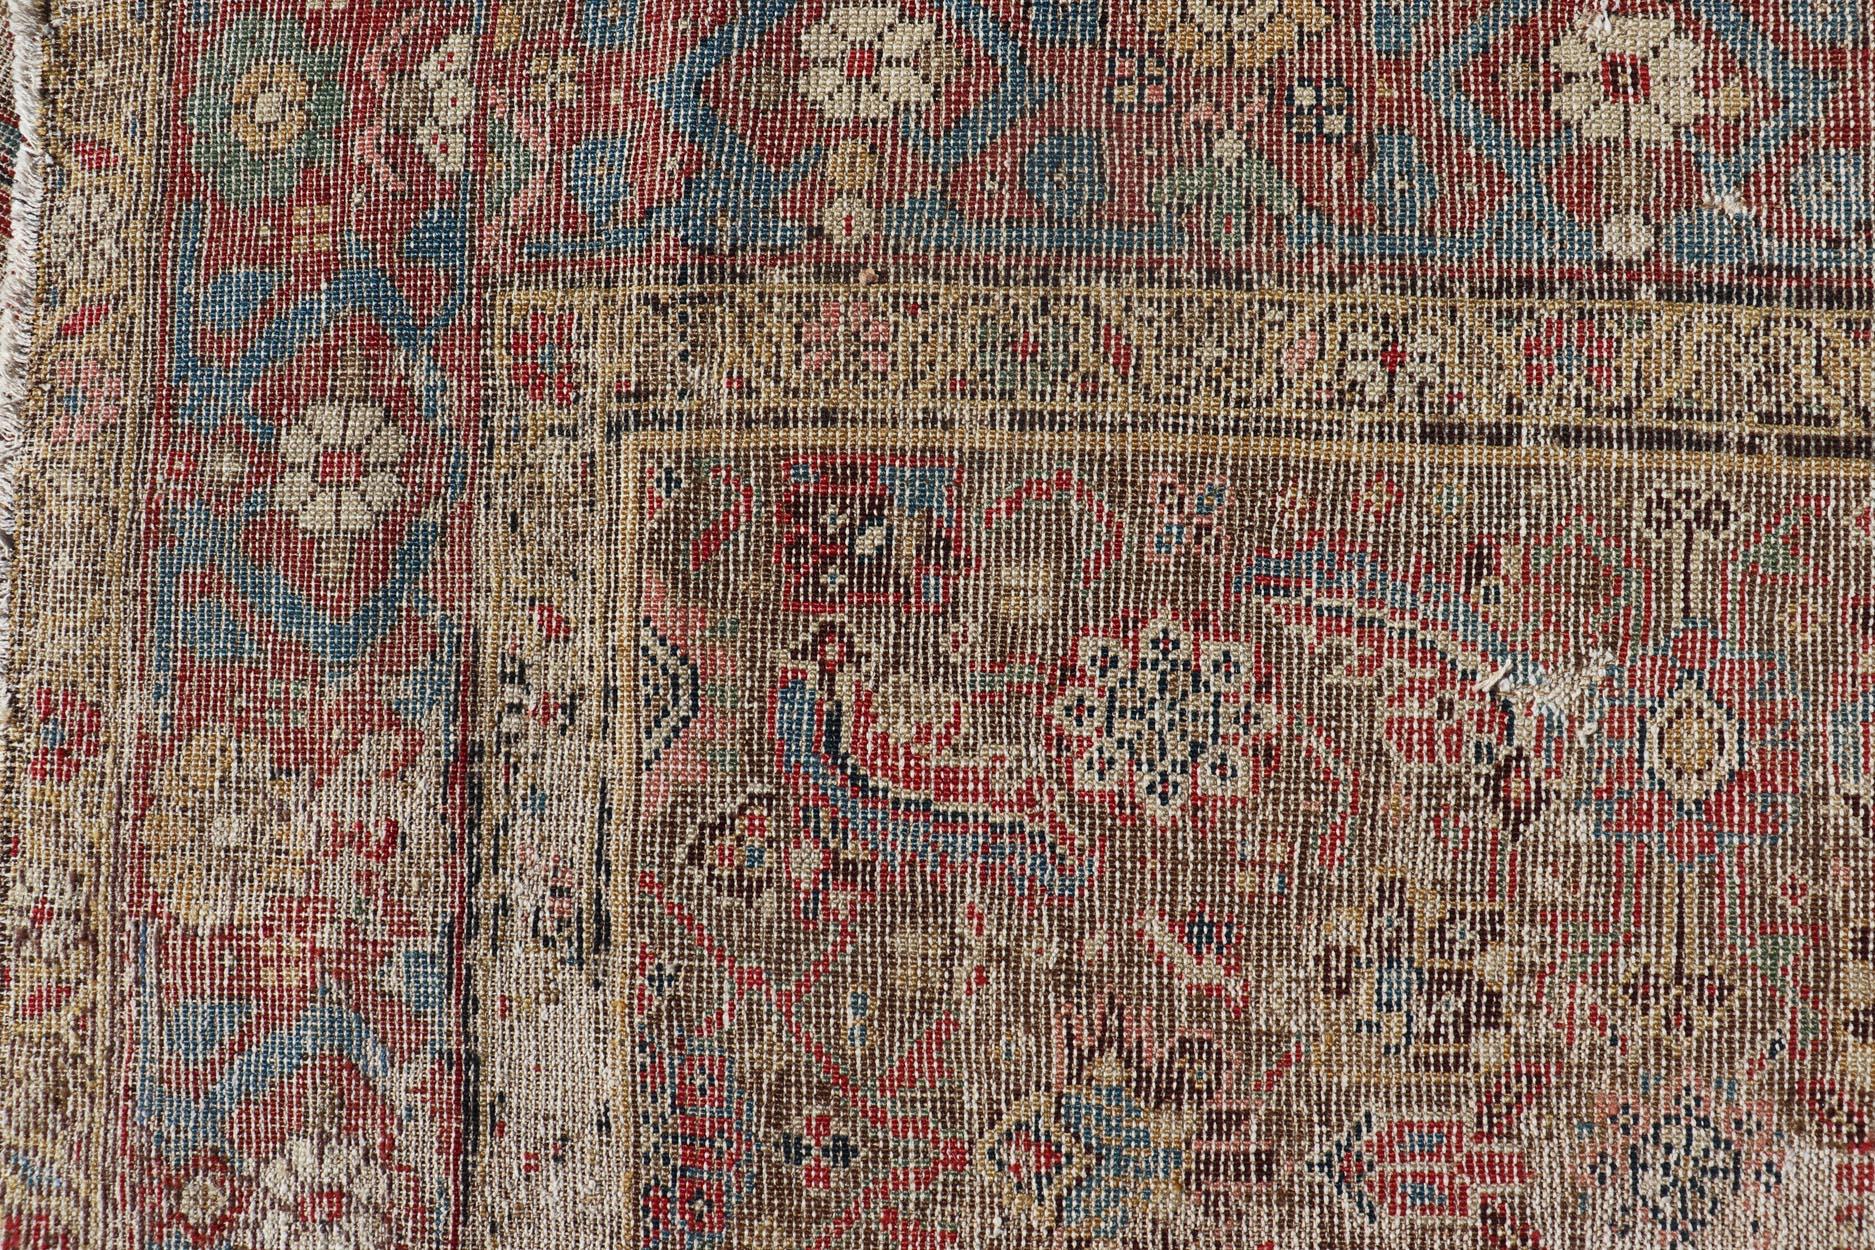 Antique Persian Sultanabad Distressed Runner with Floral Design in Jewel Tones 6